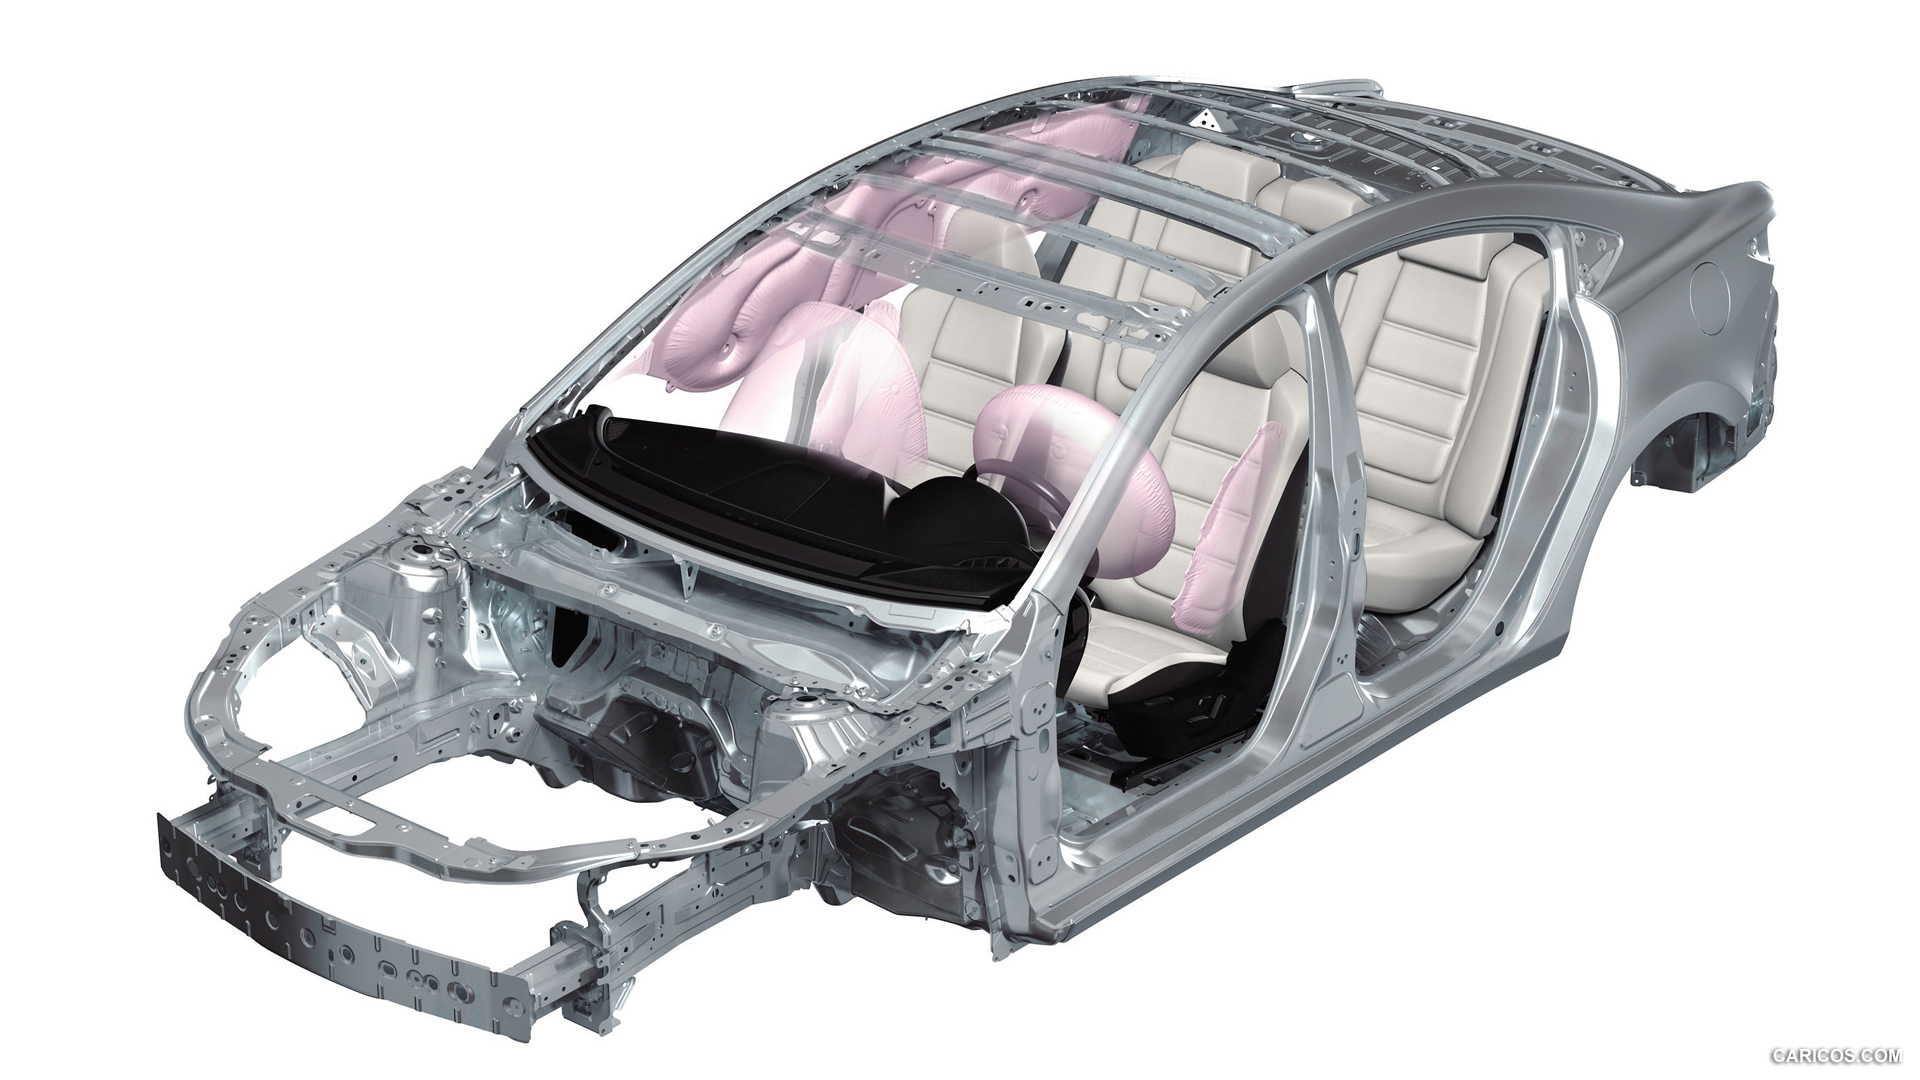 2013 Mazda 6 Chassis - , #40 of 45